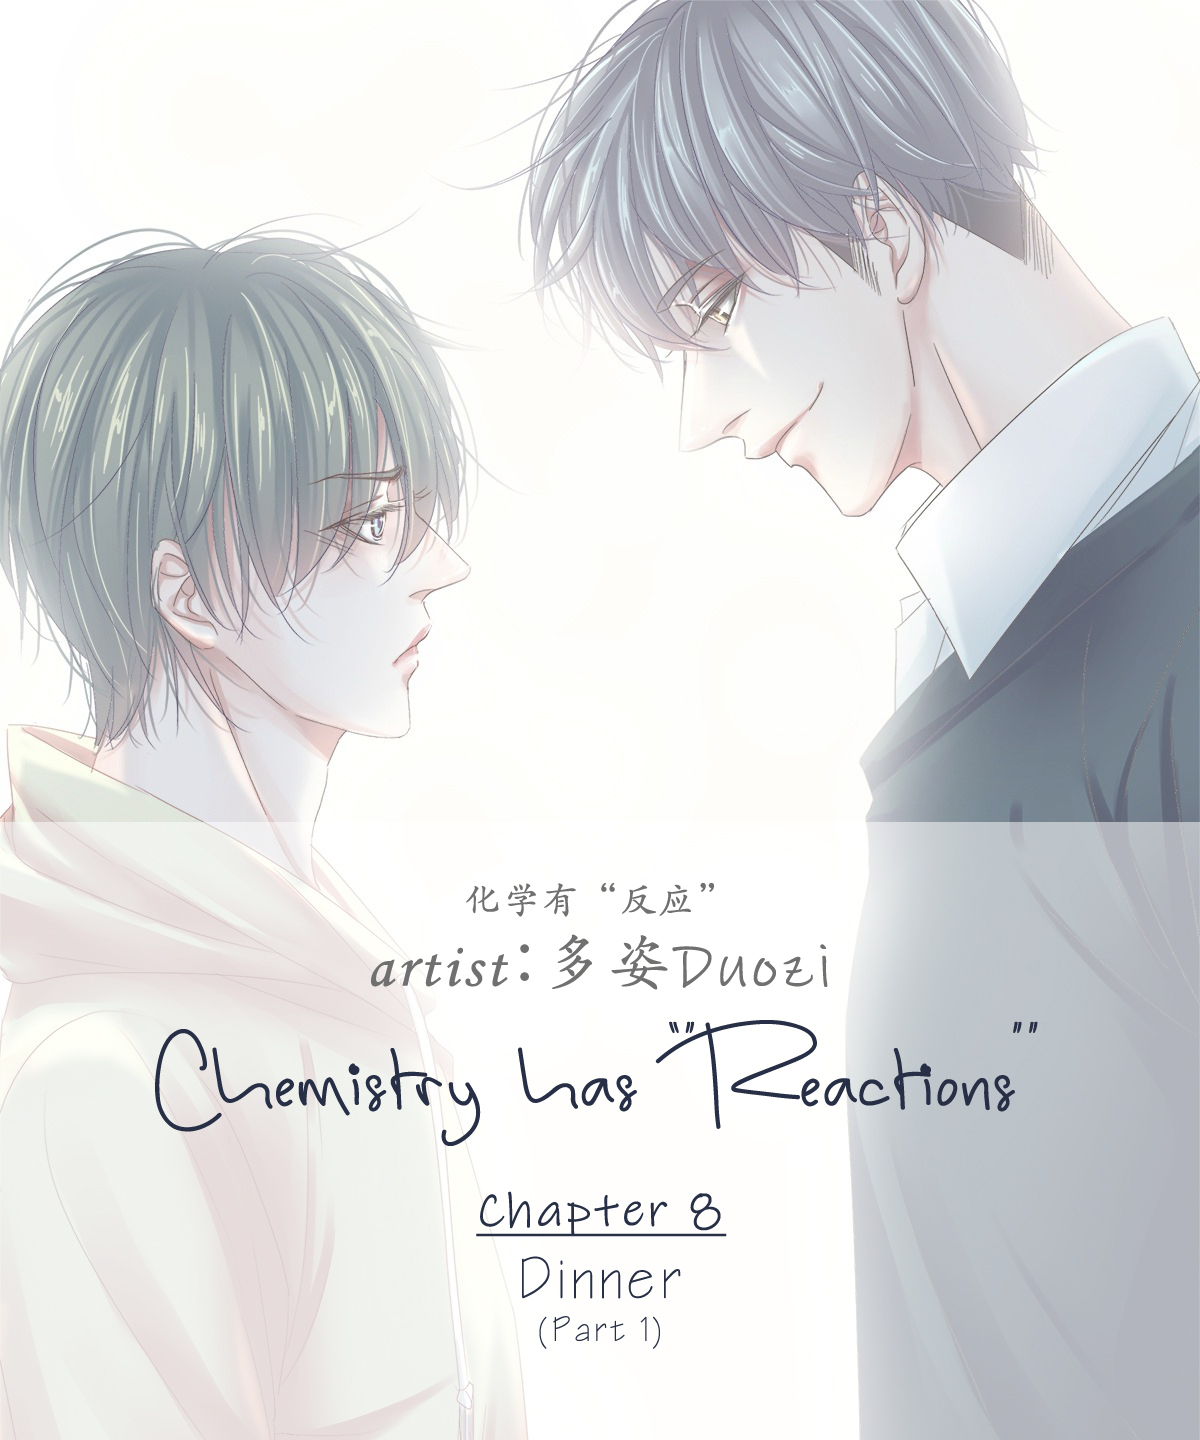 Chemistry has "Reactions" Vol. 1 Ch. 8